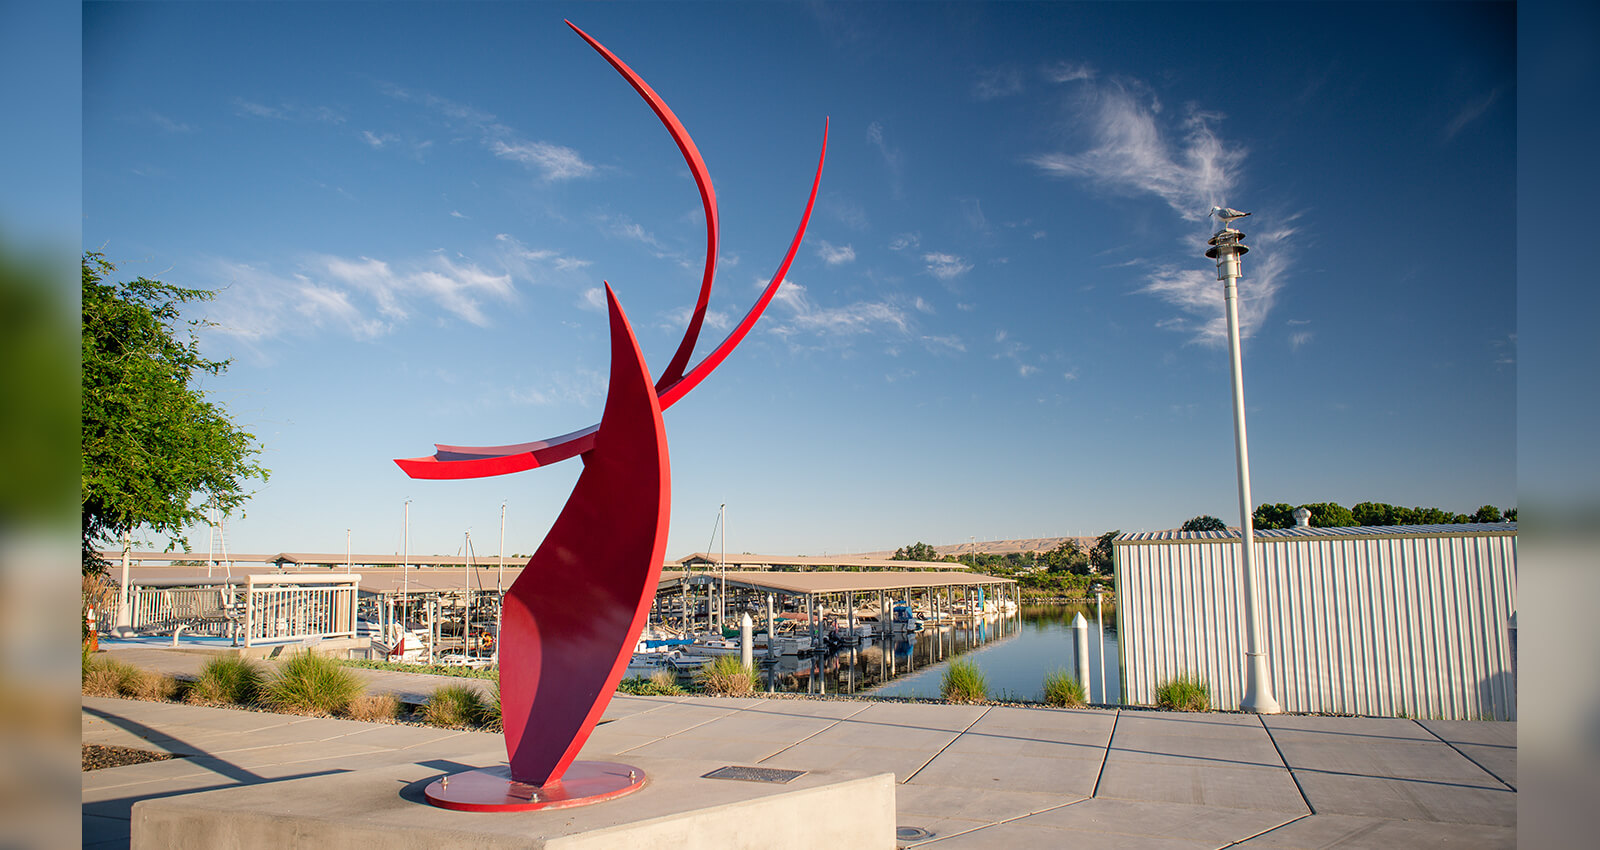 Catch the Wind artwork overlooking the Marina.